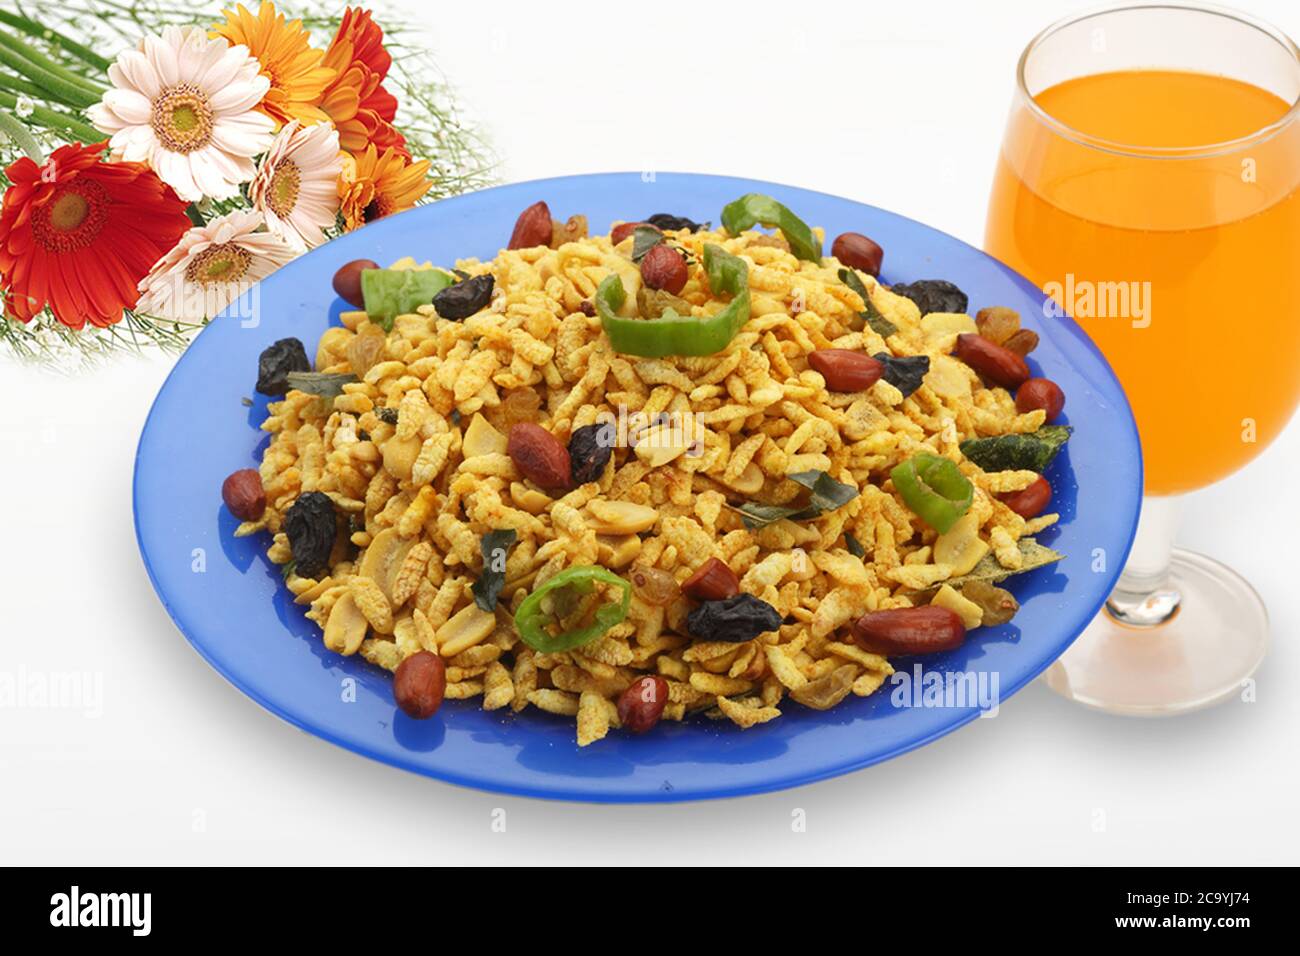 Jada Poha Namkeen Chivda / Thick Pohe Chiwda is a jar snack with a mix of sweet, salty and nuts flavours, served with Cold drinks. selective focus - I Stock Photo